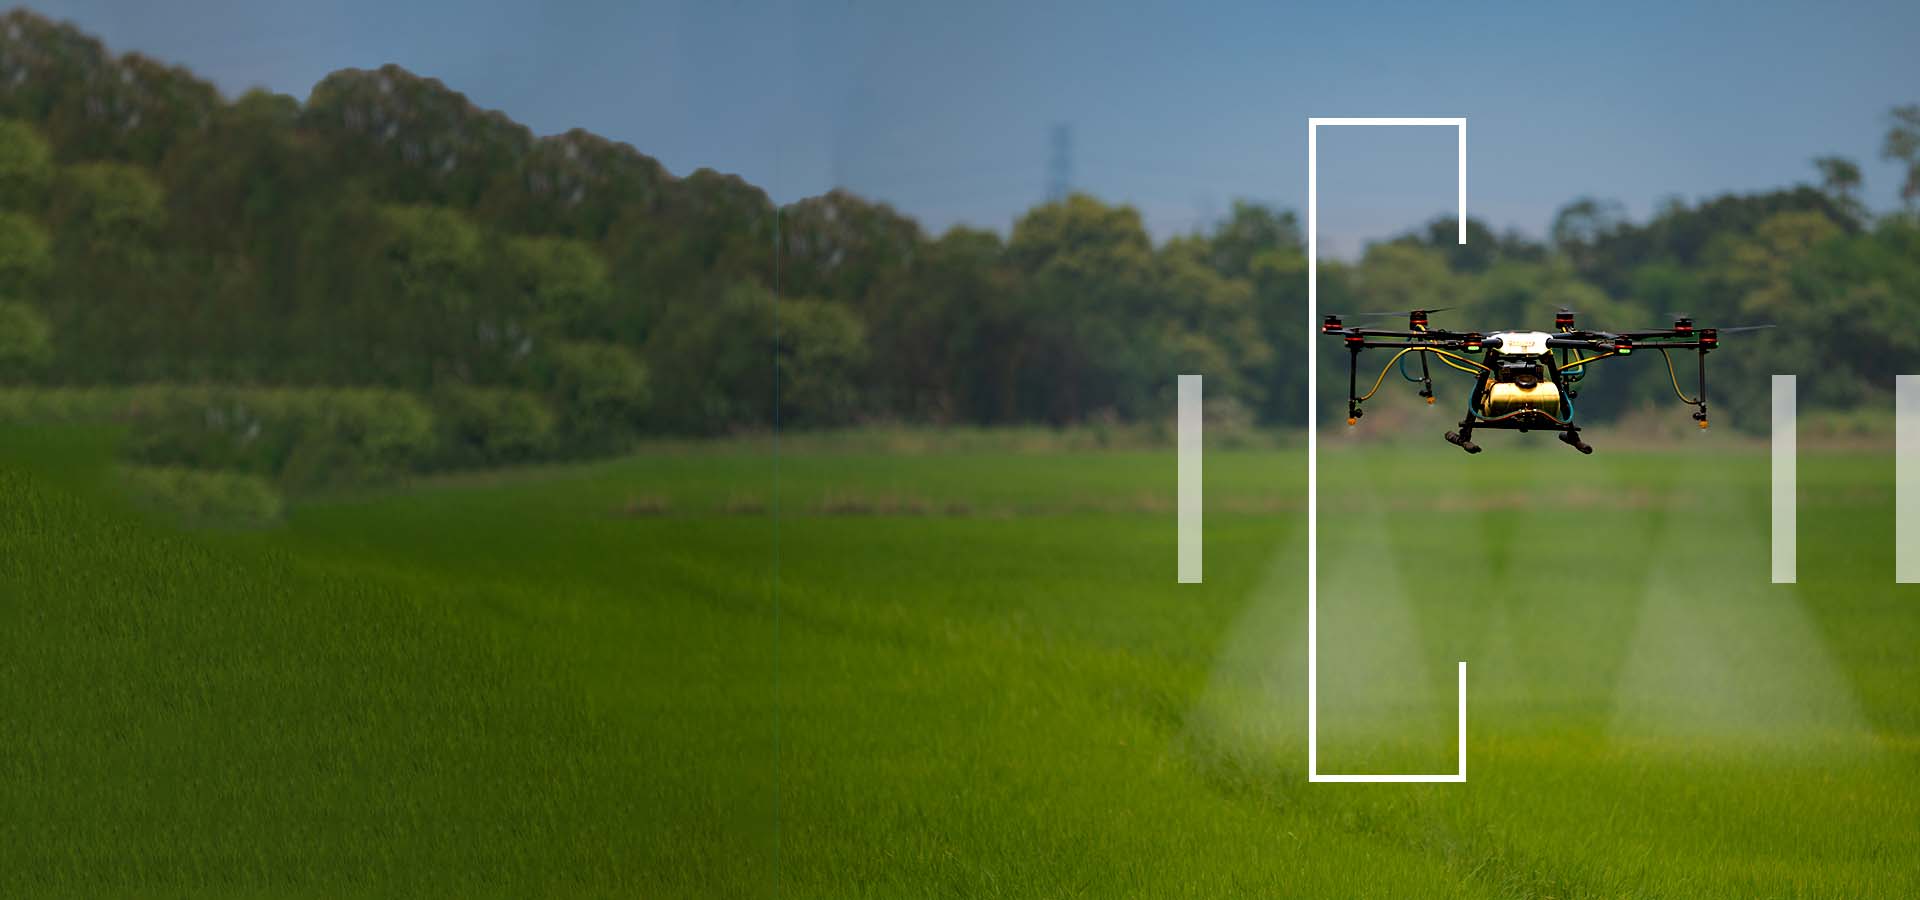 A transformation story of BASF Agriculture Solutions to achieve faster time-to-market using DevOps and DataOps